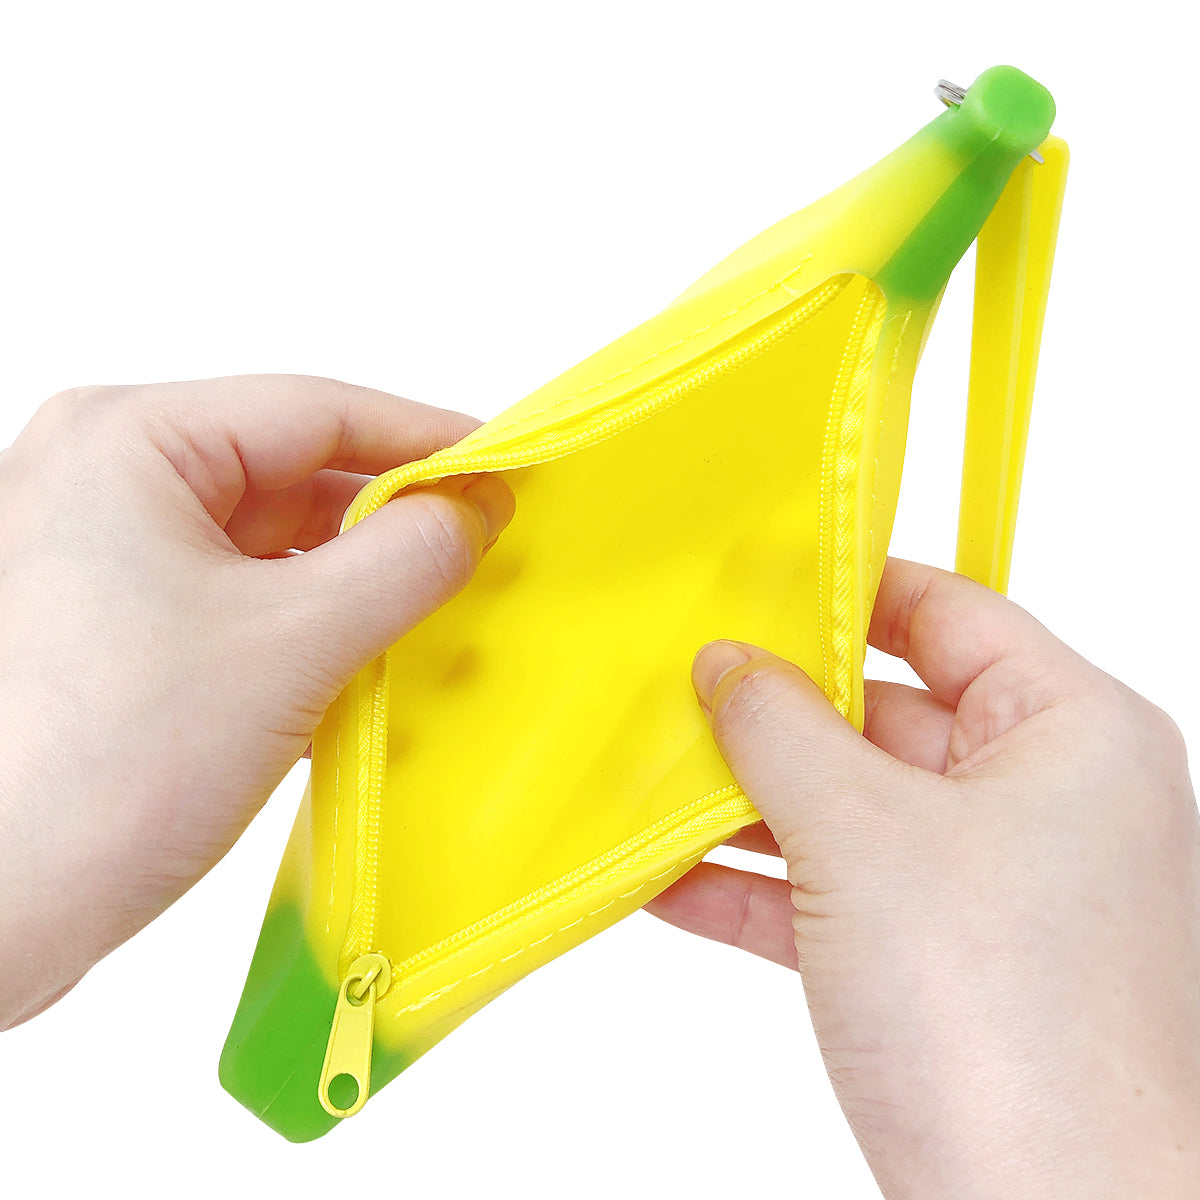 Wrapables Silicone Banana Pencil Pouch (Set of 2)